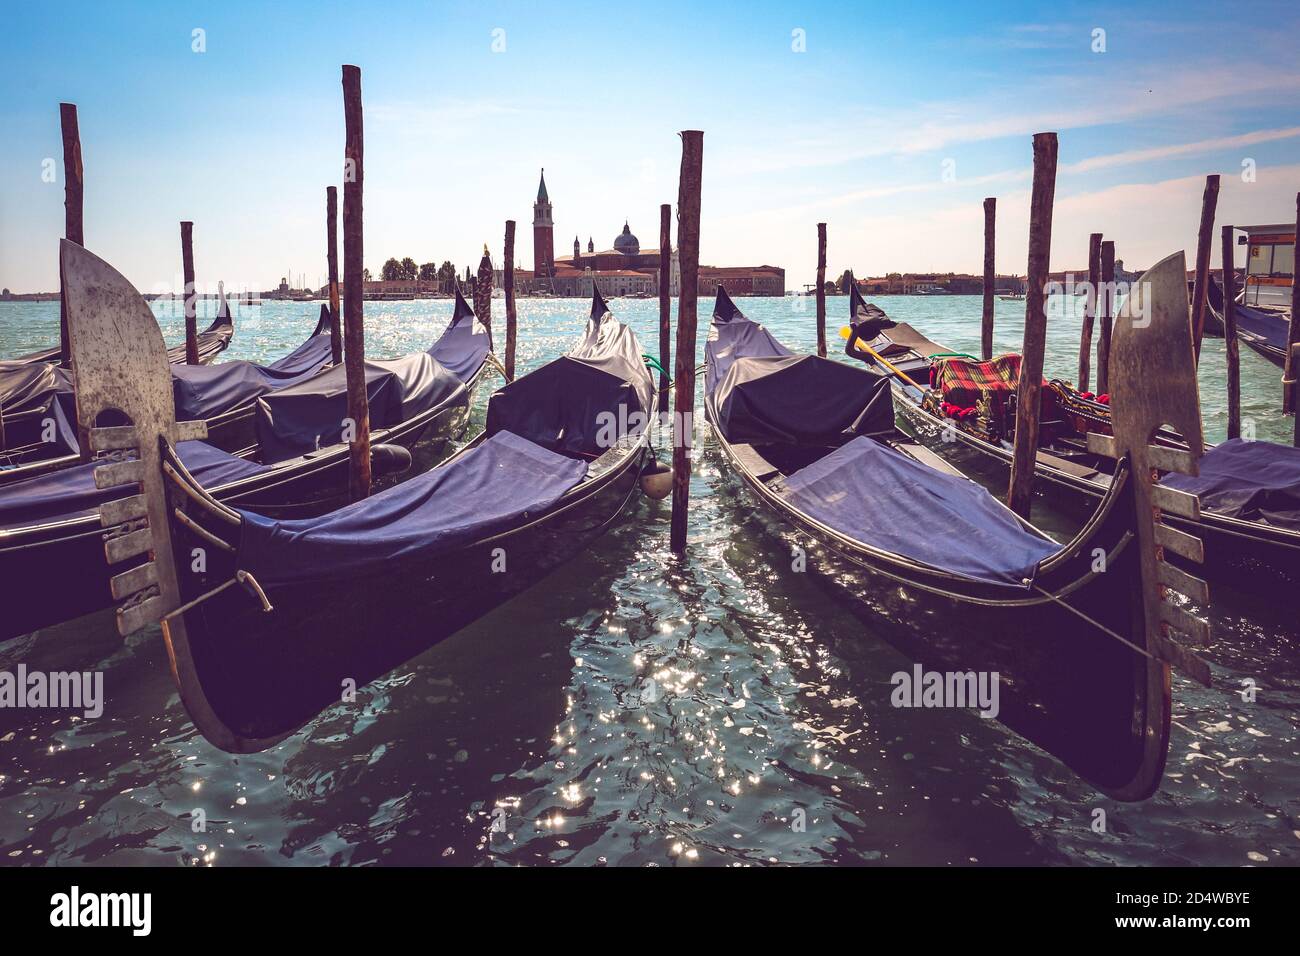 Typical venetian gondolas anchored at the lagoon with San Giorgio Maggiore island and its campanile (bell tower) in the background. Stock Photo